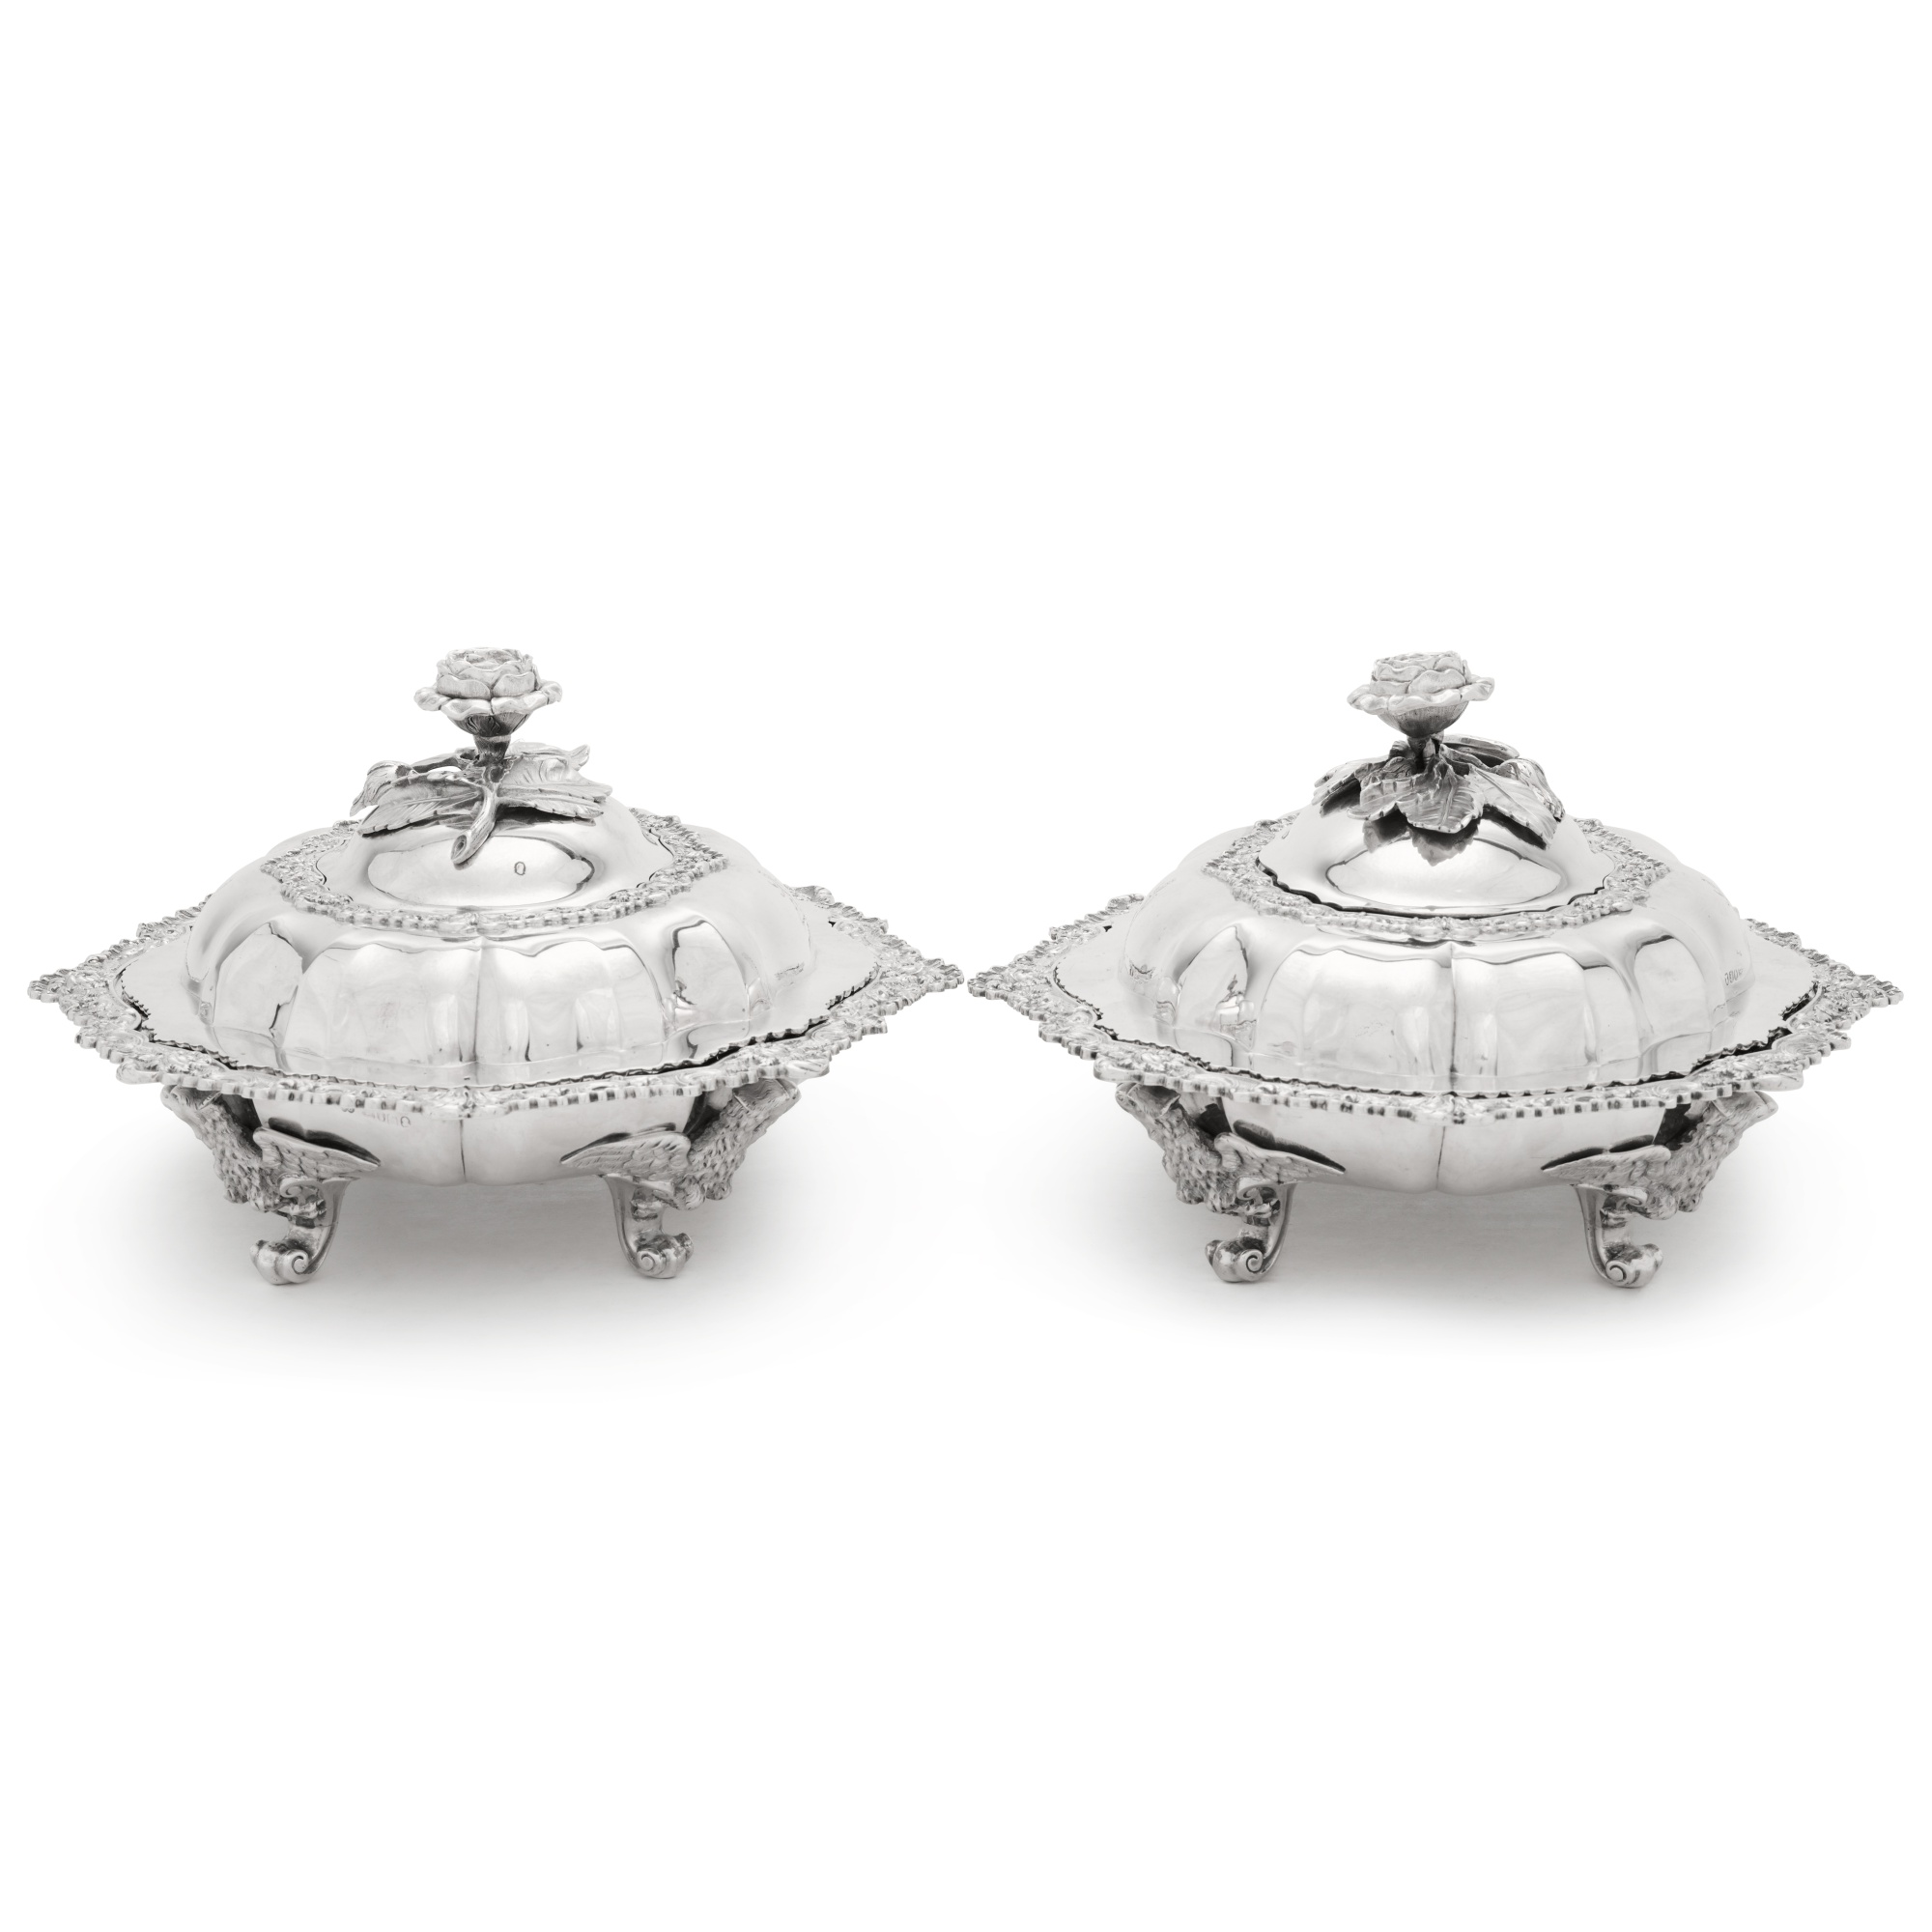 A pair of George IV silver entrée dishes, Thomas Burwash, London, 1821 - Image 2 of 5